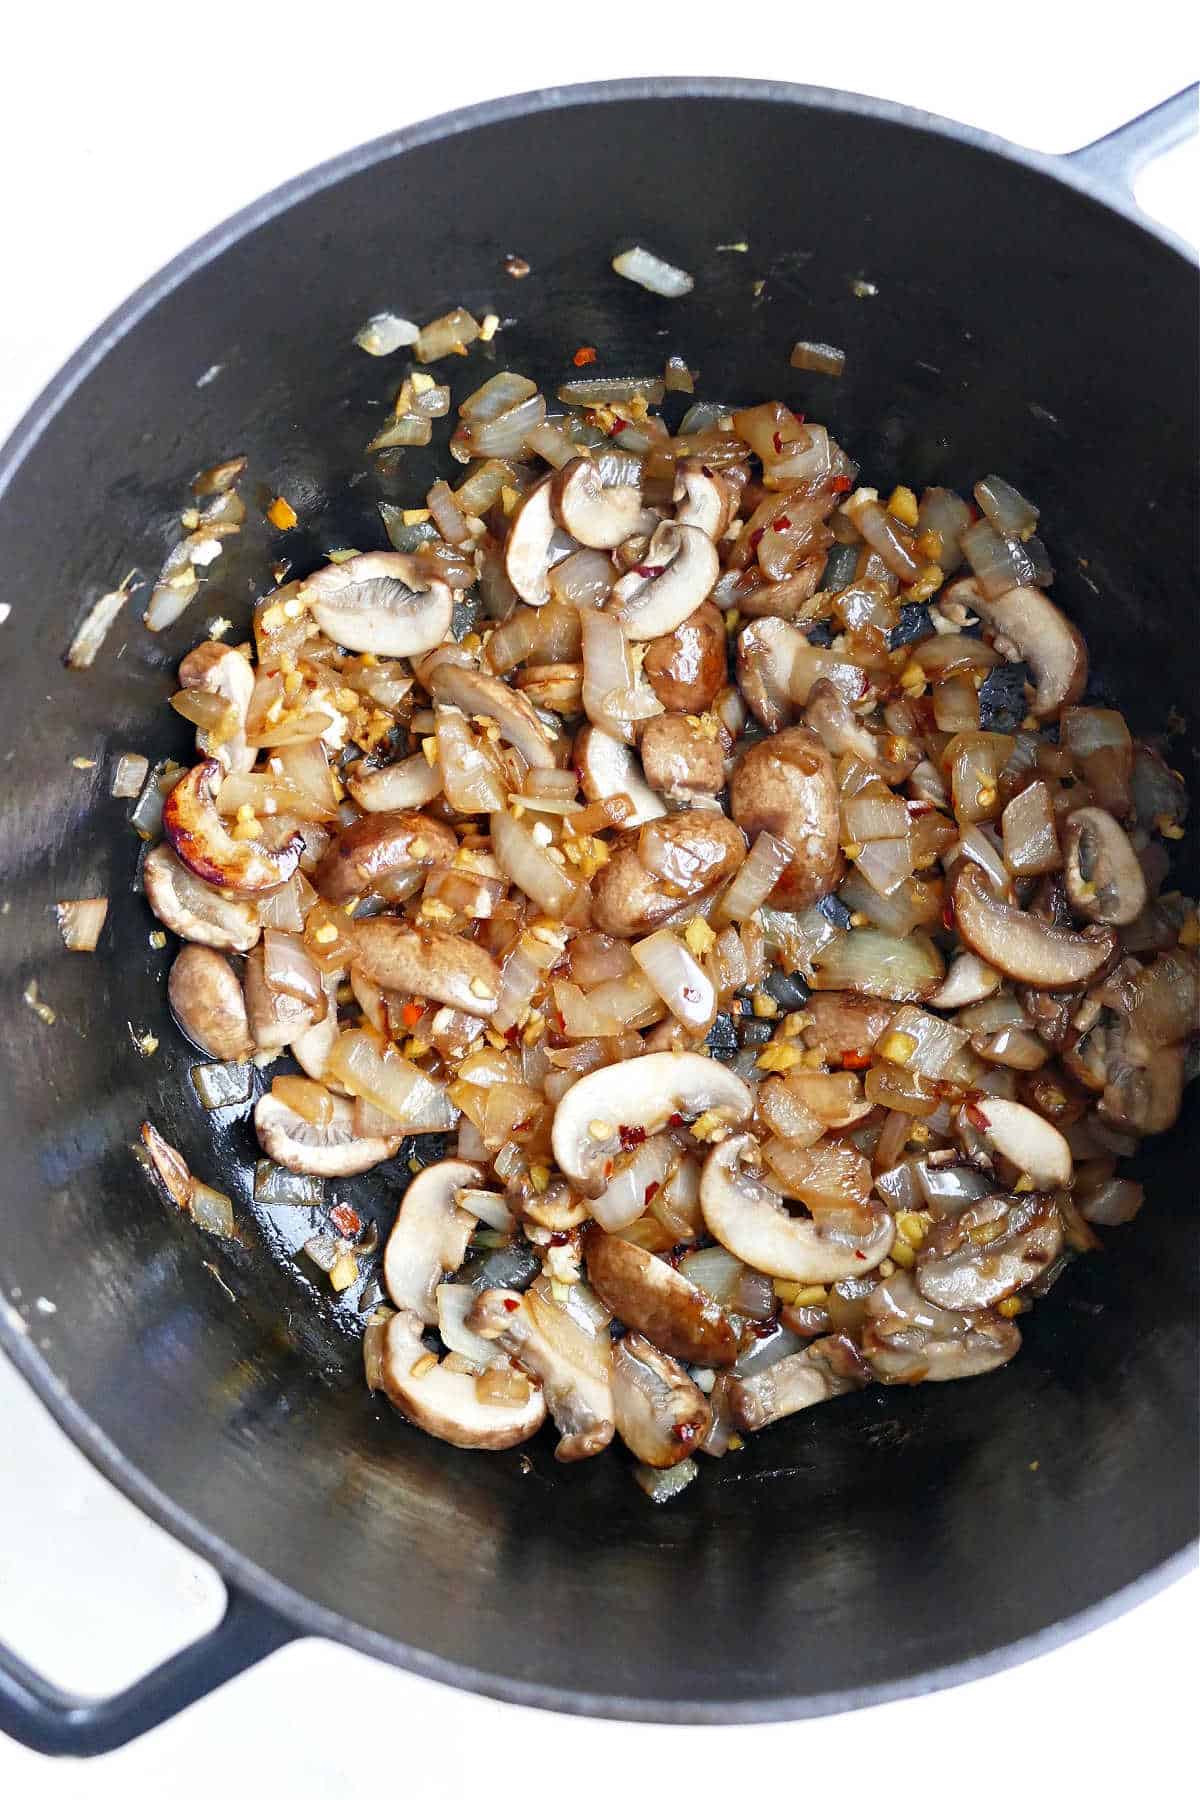 mushrooms, onion, and garlic cooking in olive oil in a large black pot